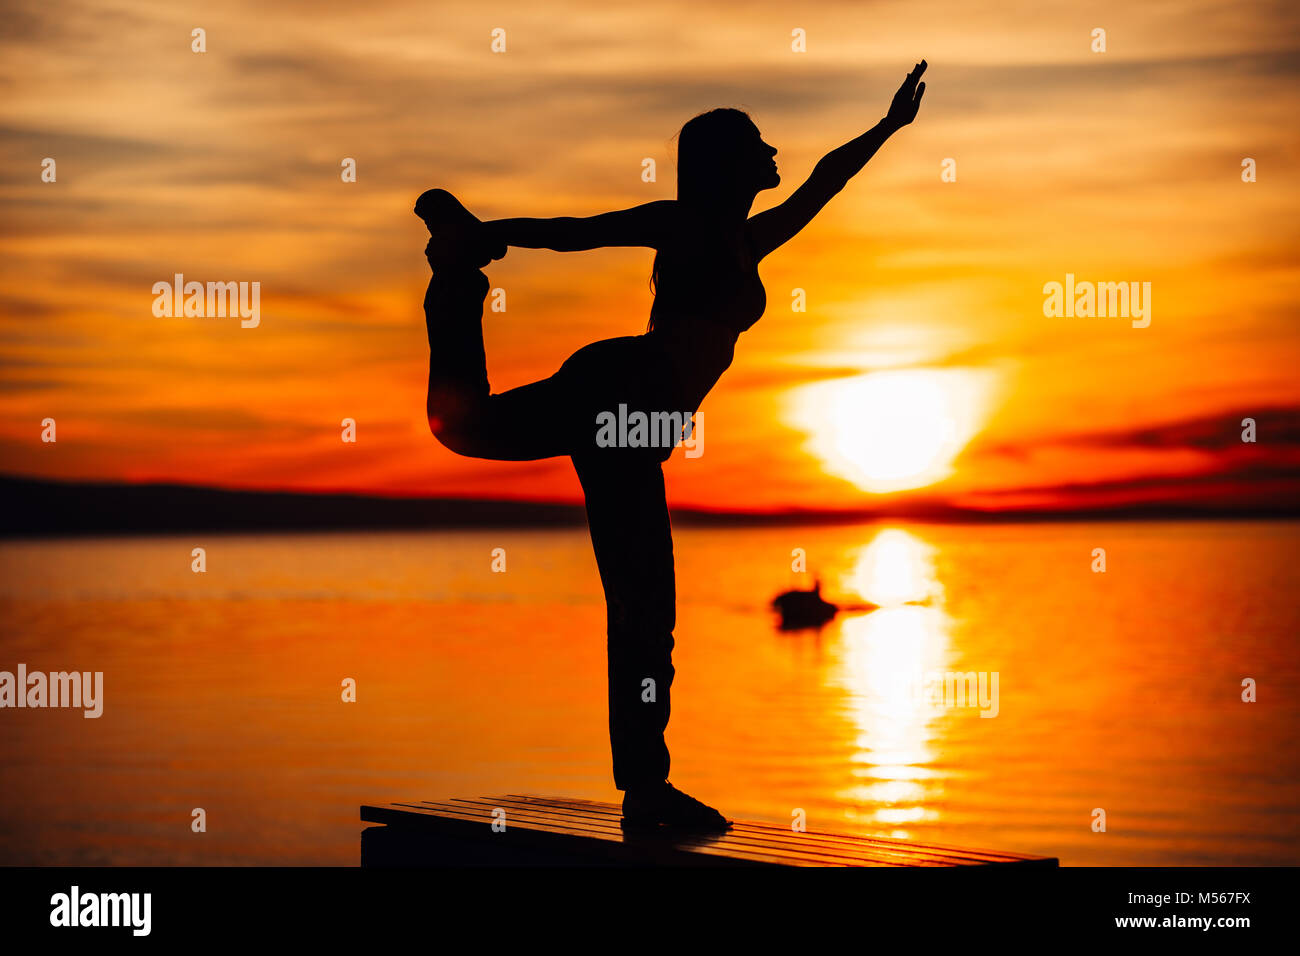 Carefree woman meditating in nature.Finding inner peace.Yoga practice.Spiritual healing lifestyle.Enjoying peace,anti-stress therapy,mindfulness medit Stock Photo